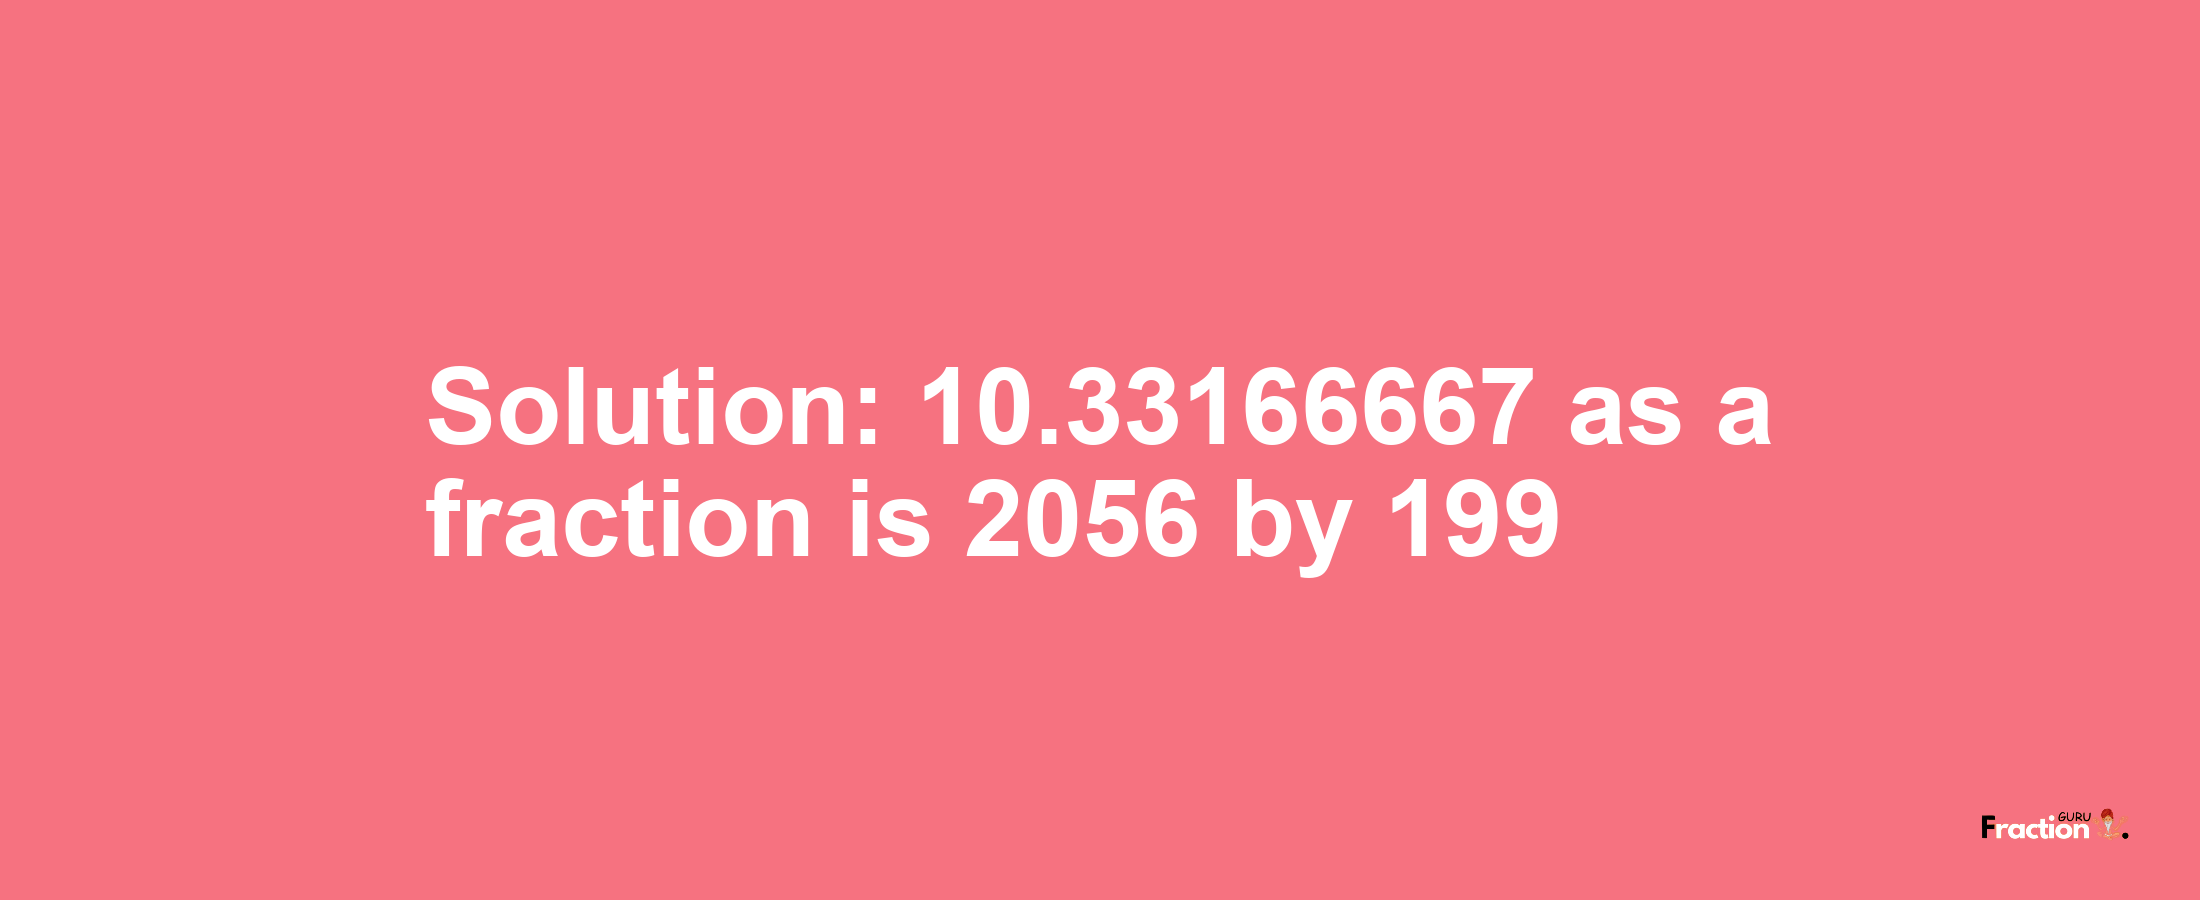 Solution:10.33166667 as a fraction is 2056/199